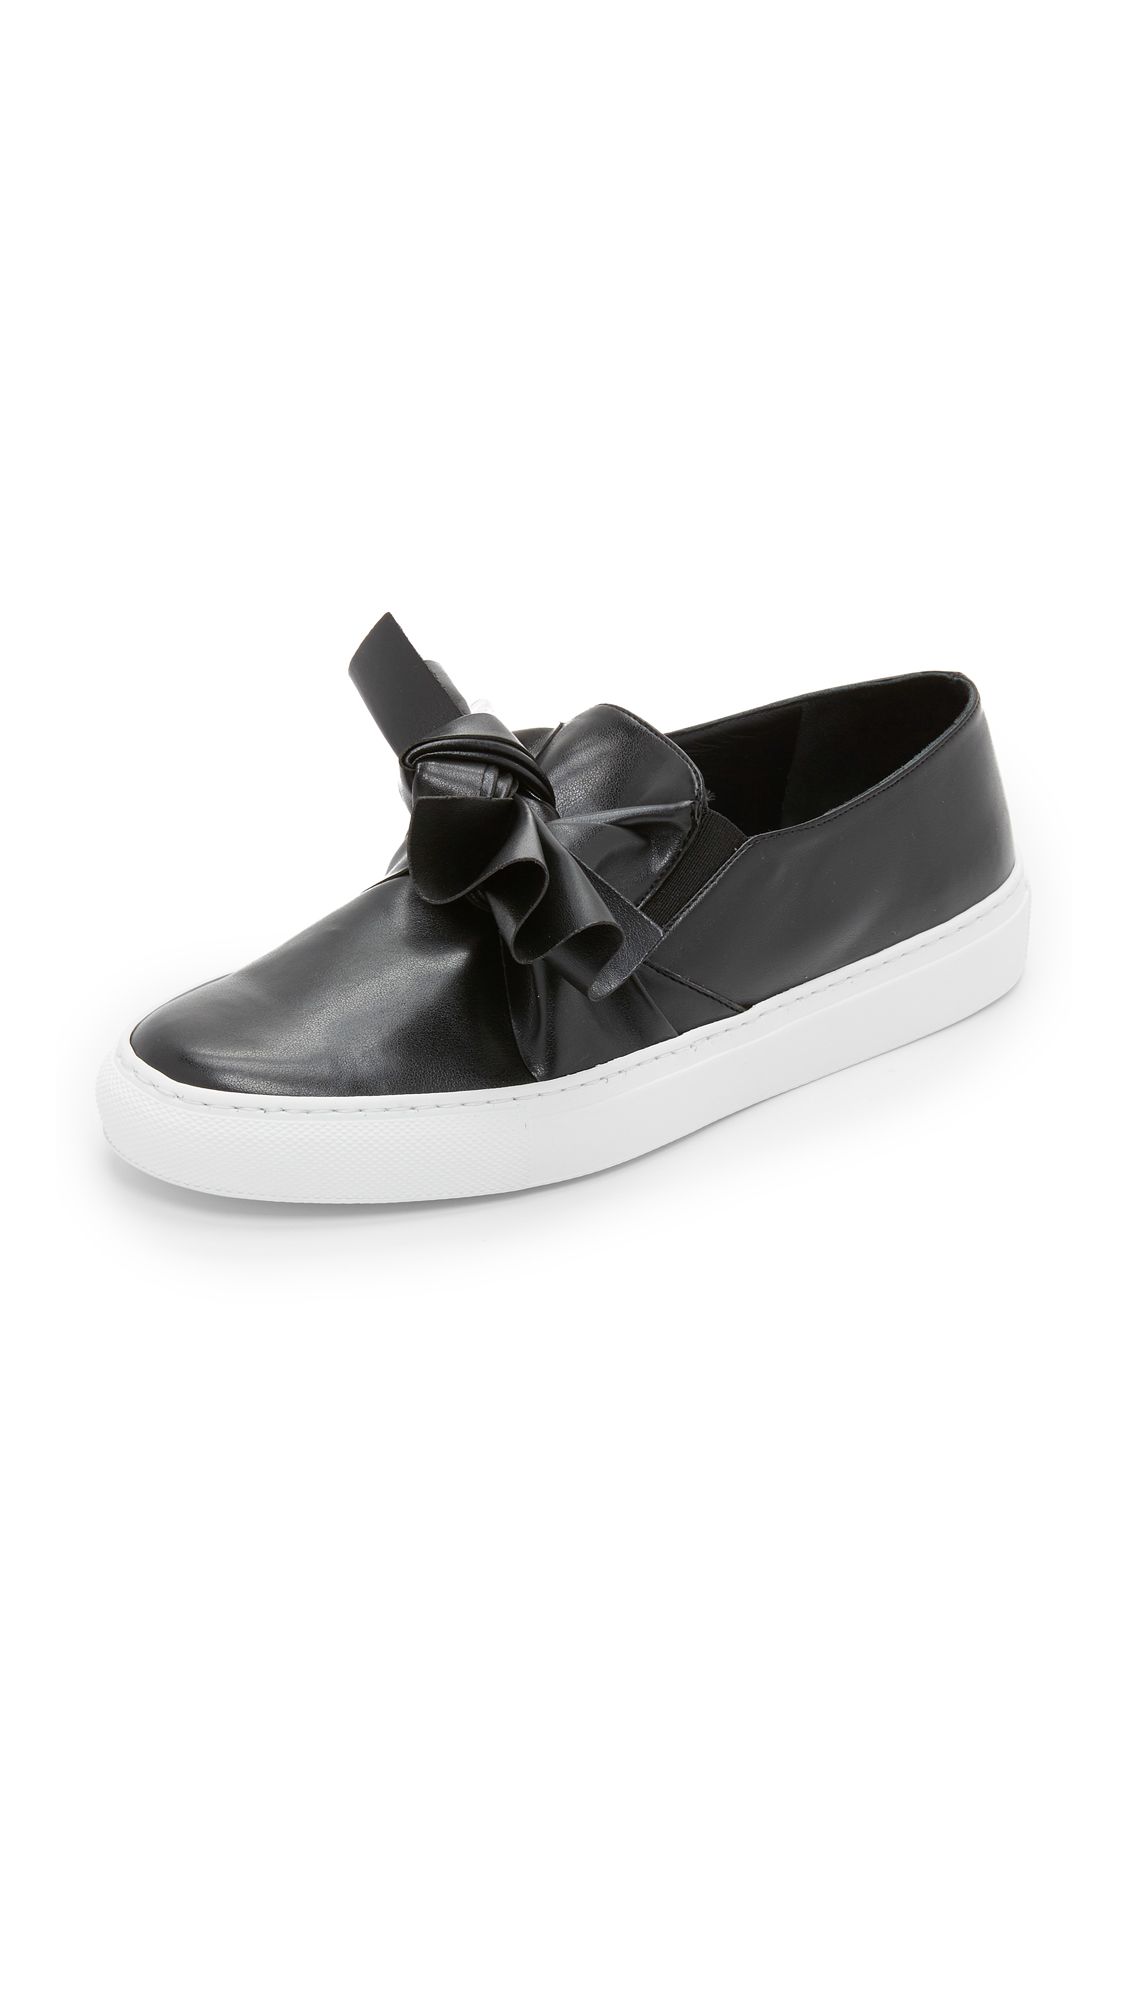 Cedric Charlier Faux Leather Sneakers - Black | Shopbop